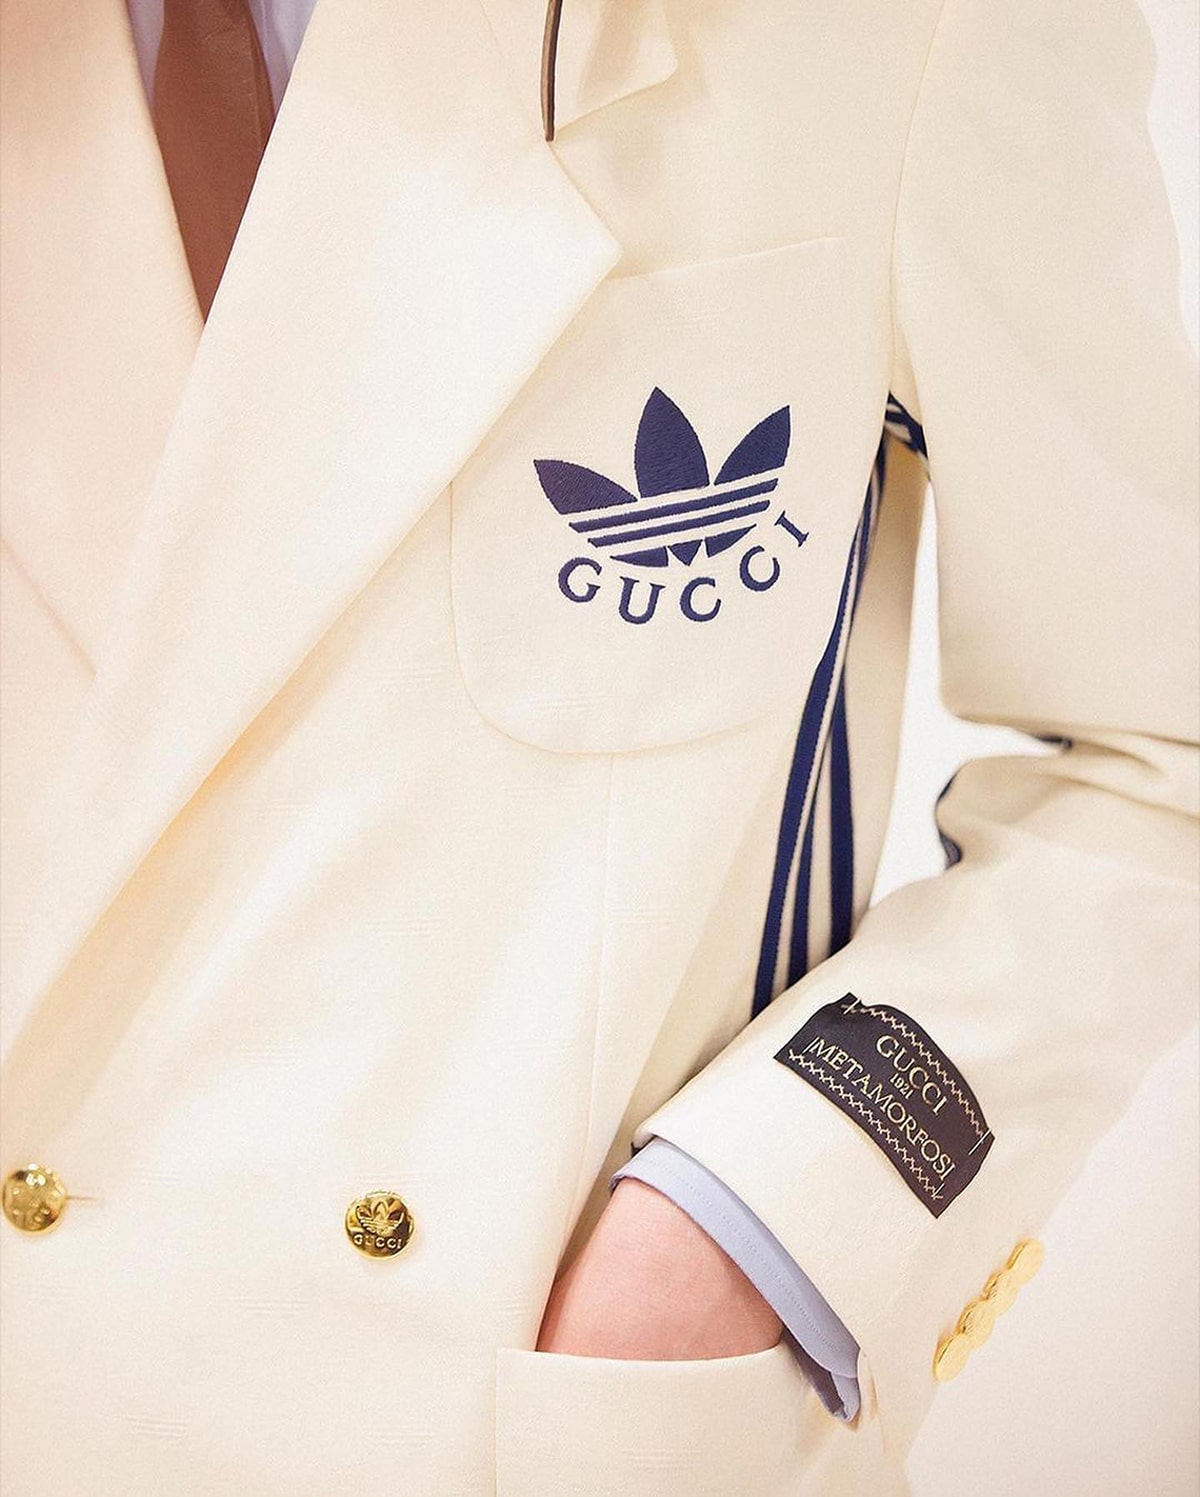 Gucci adidas Originals 2022 Collection Release Date